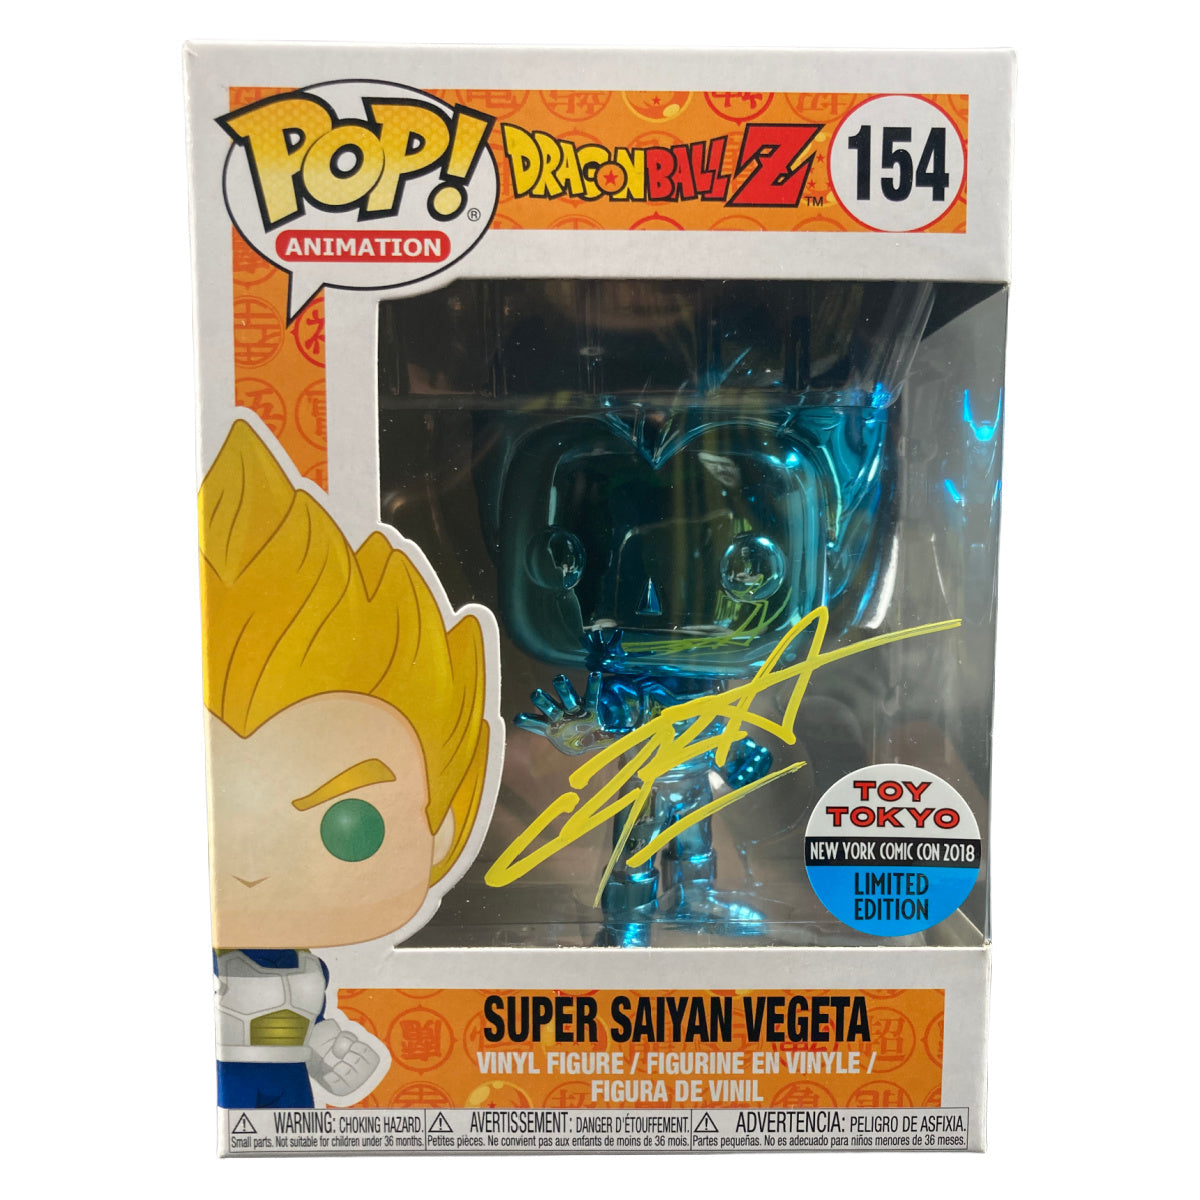 Funko - Follow the instructions in the image and this SDCC exclusive Chrome  Super Saiyan Vegeta Pop! could be yours!